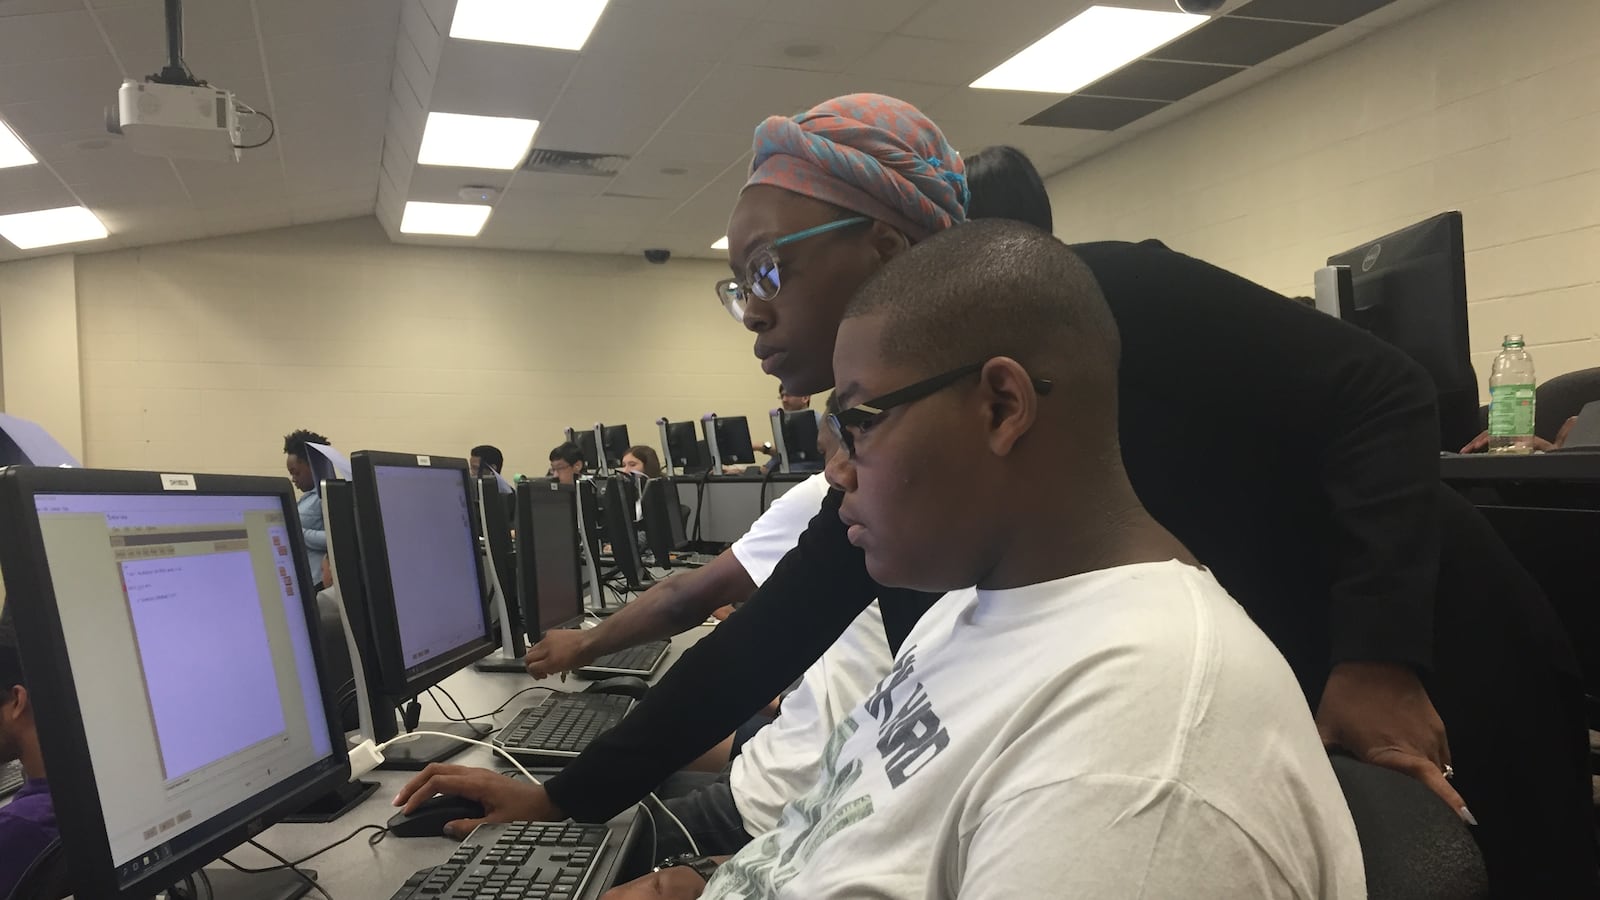 Joshua Williams, a student at Central High School, learns about coding with the help of Terricka Muhammed, a teaching assistant at the University of Memphis.